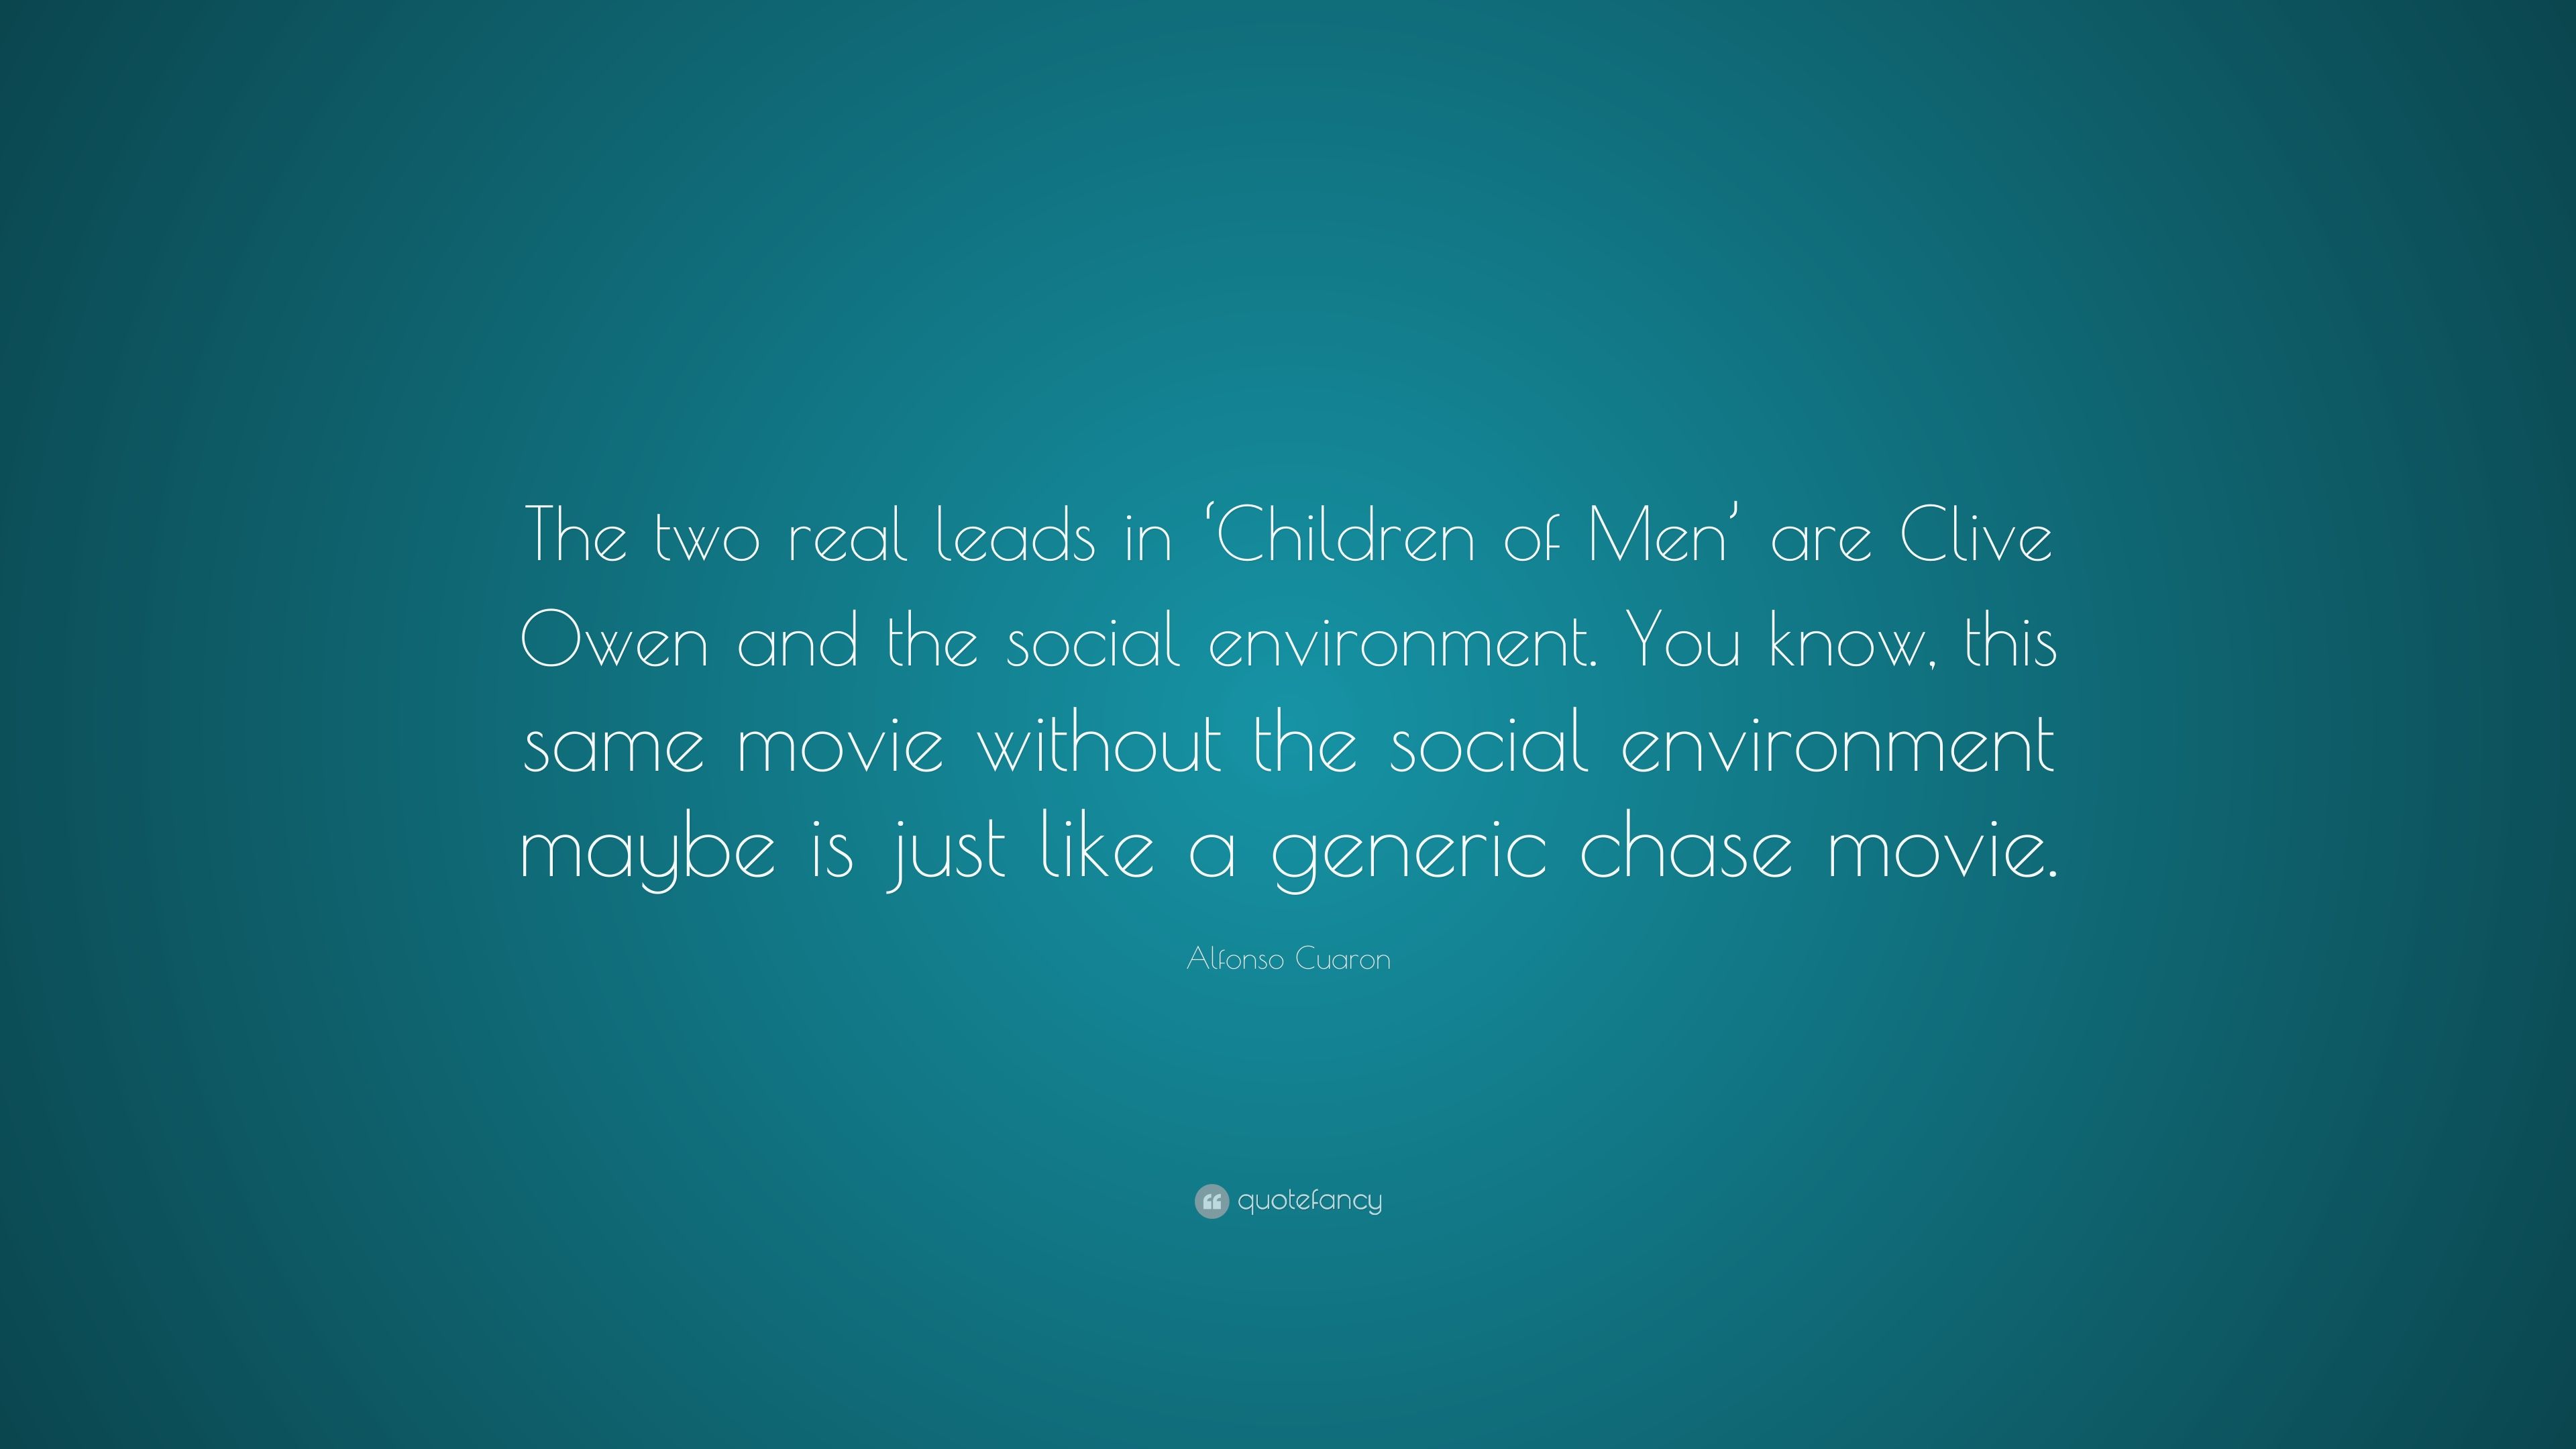 Alfonso Cuaron Quote: “The two real leads in 'Children of Men' are